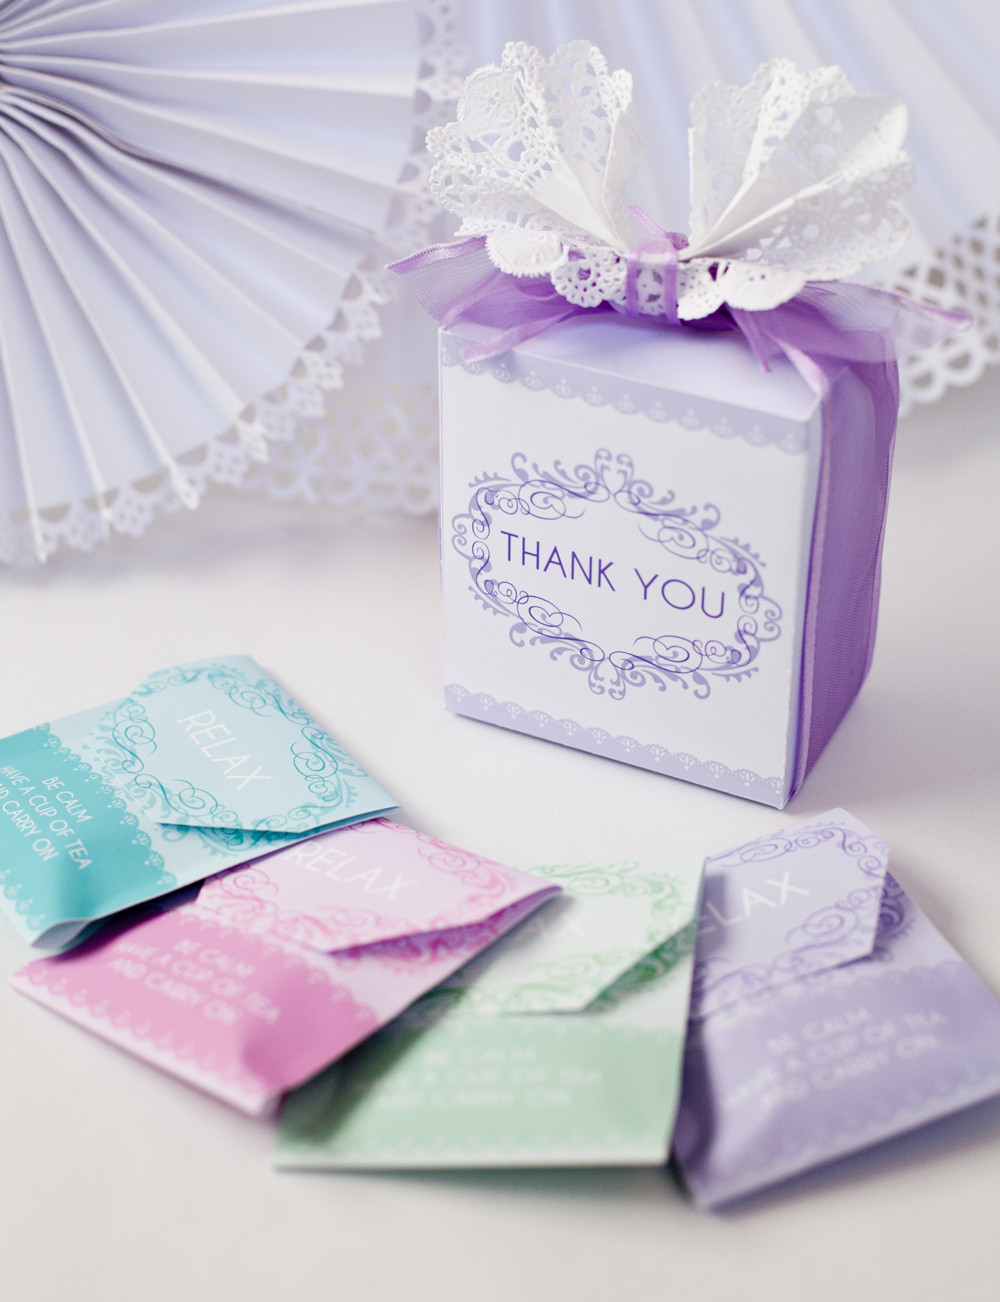 Baby Shower Party Favors DIY
 DIY Baby Shower Tea Party Favor Free Printable